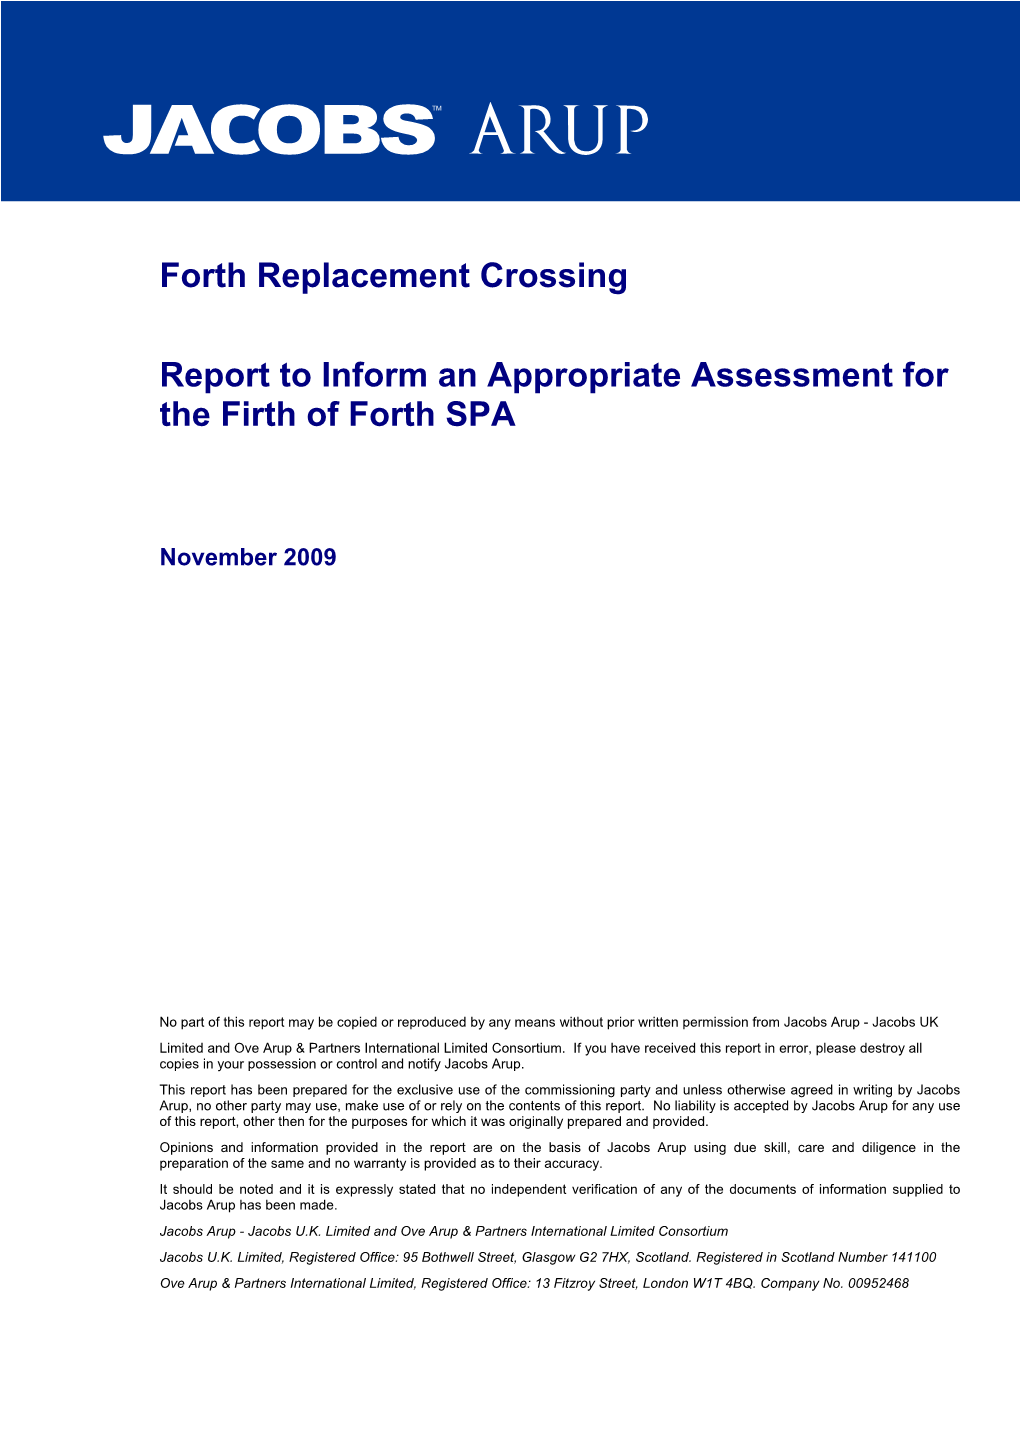 Forth Replacement Crossing Report to Inform an Appropriate Assessment for the Firth of Forth SPA